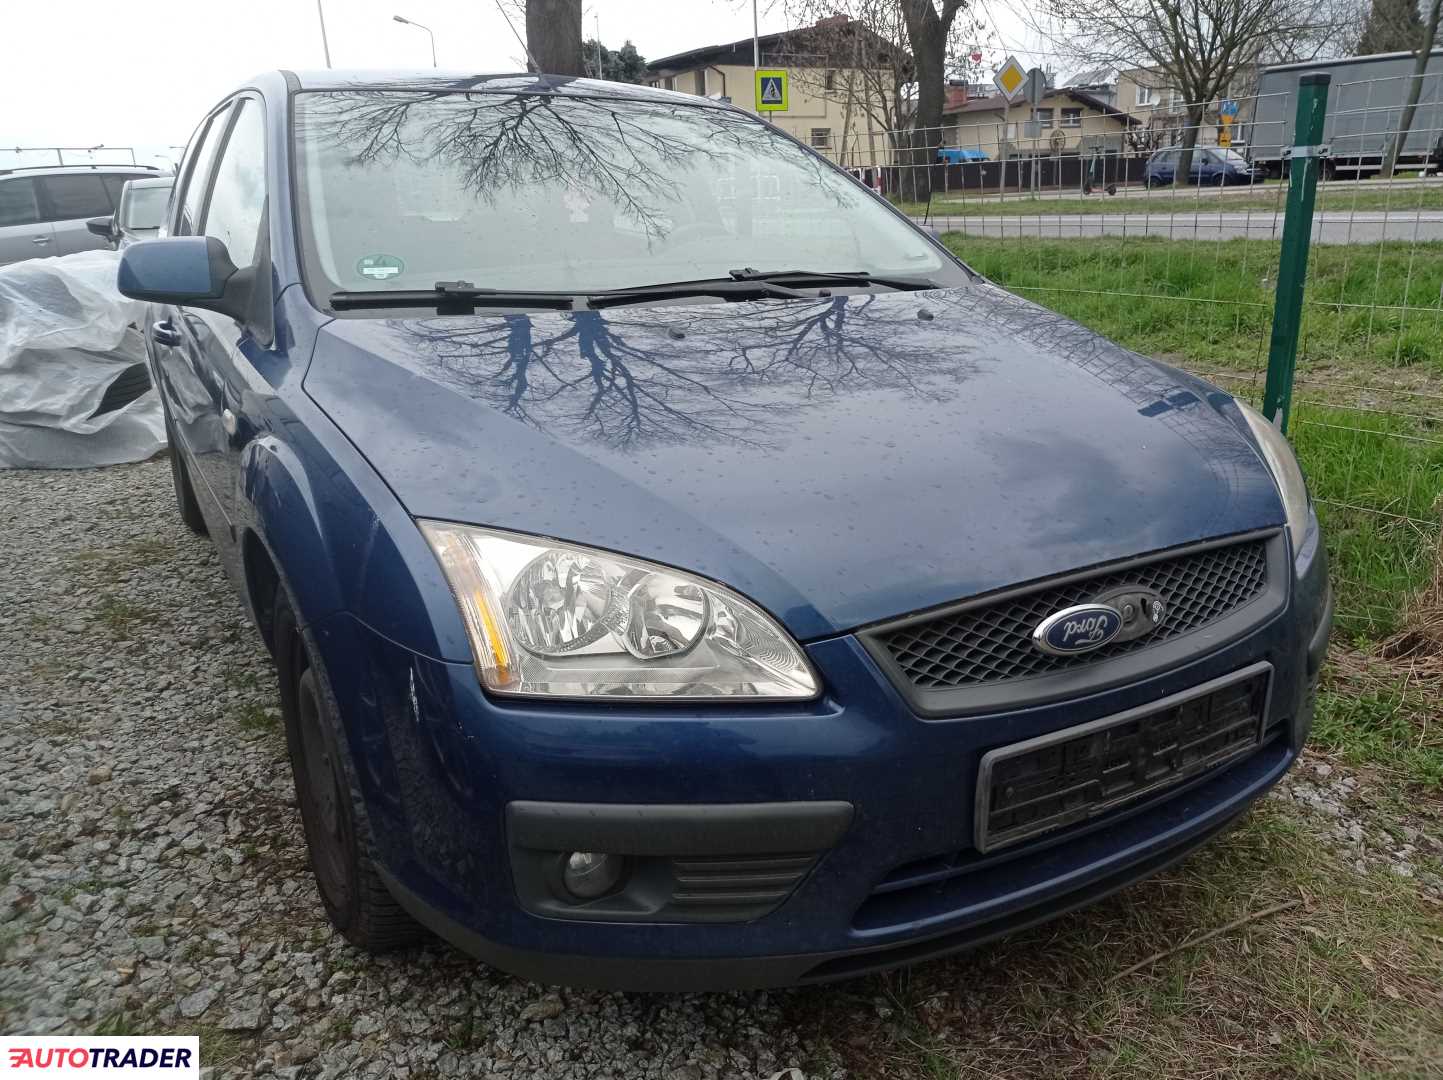 Ford Focus 2007 1.6 101 KM